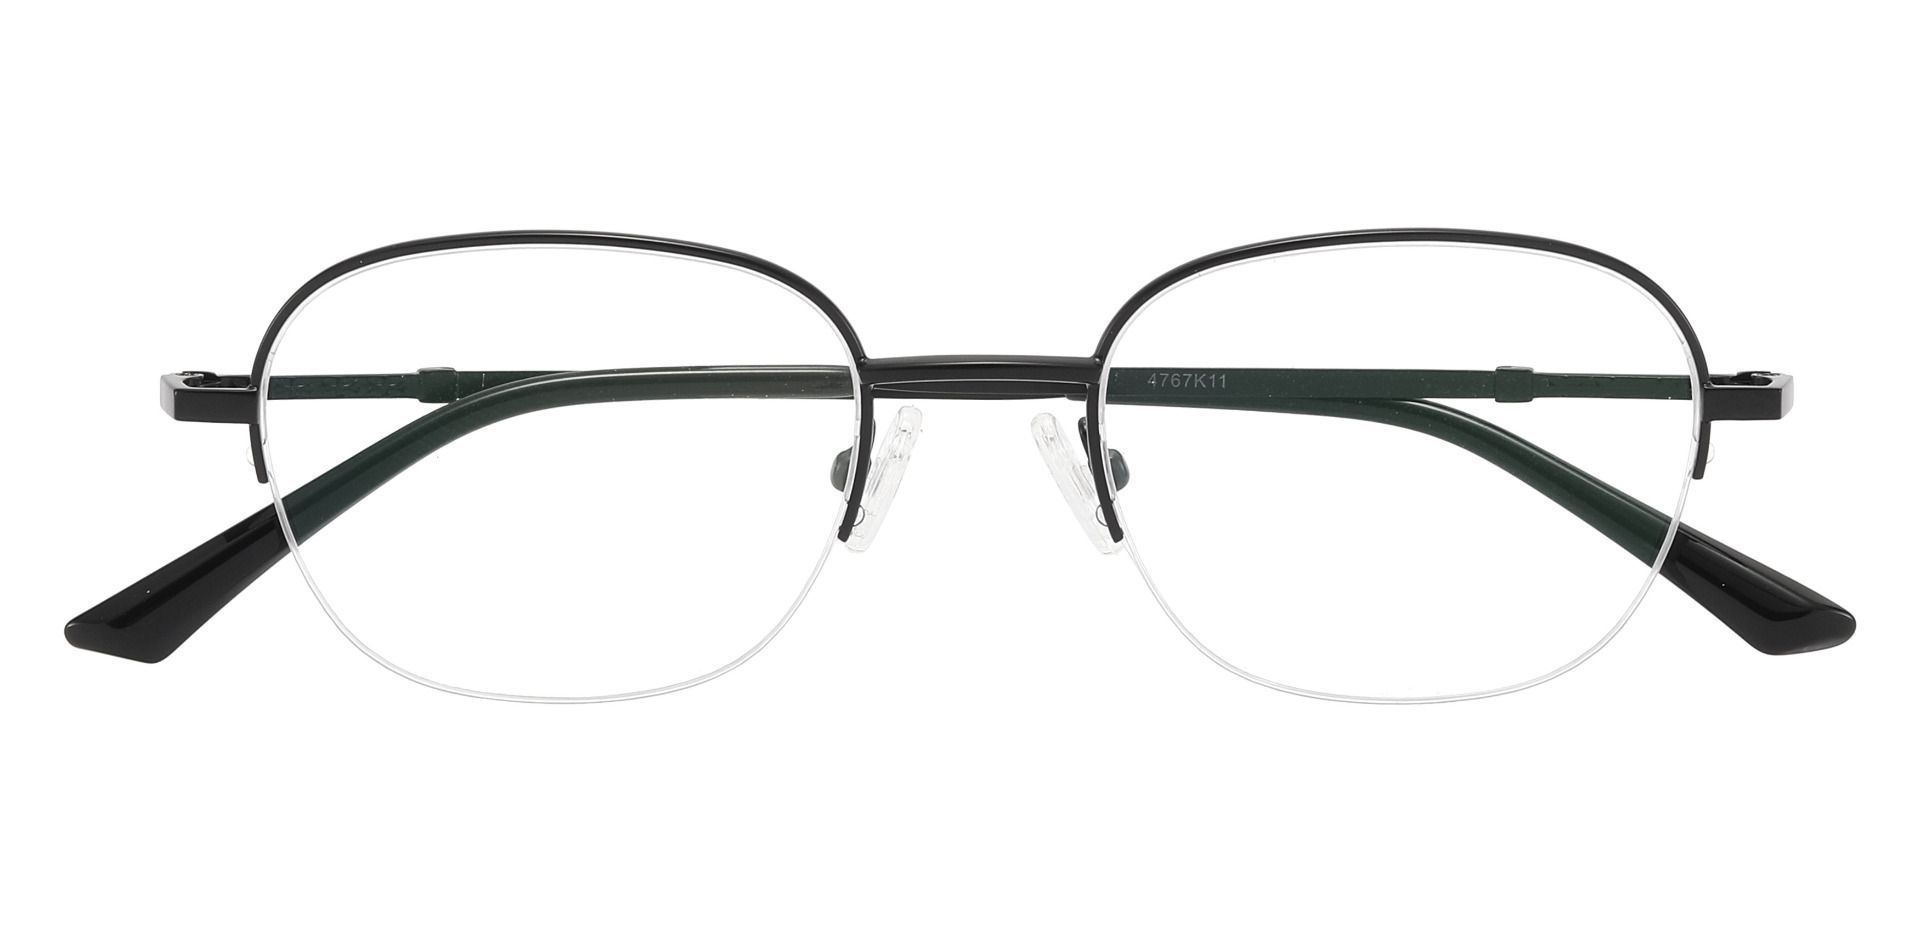 Rochester Oval Lined Bifocal Glasses - Black